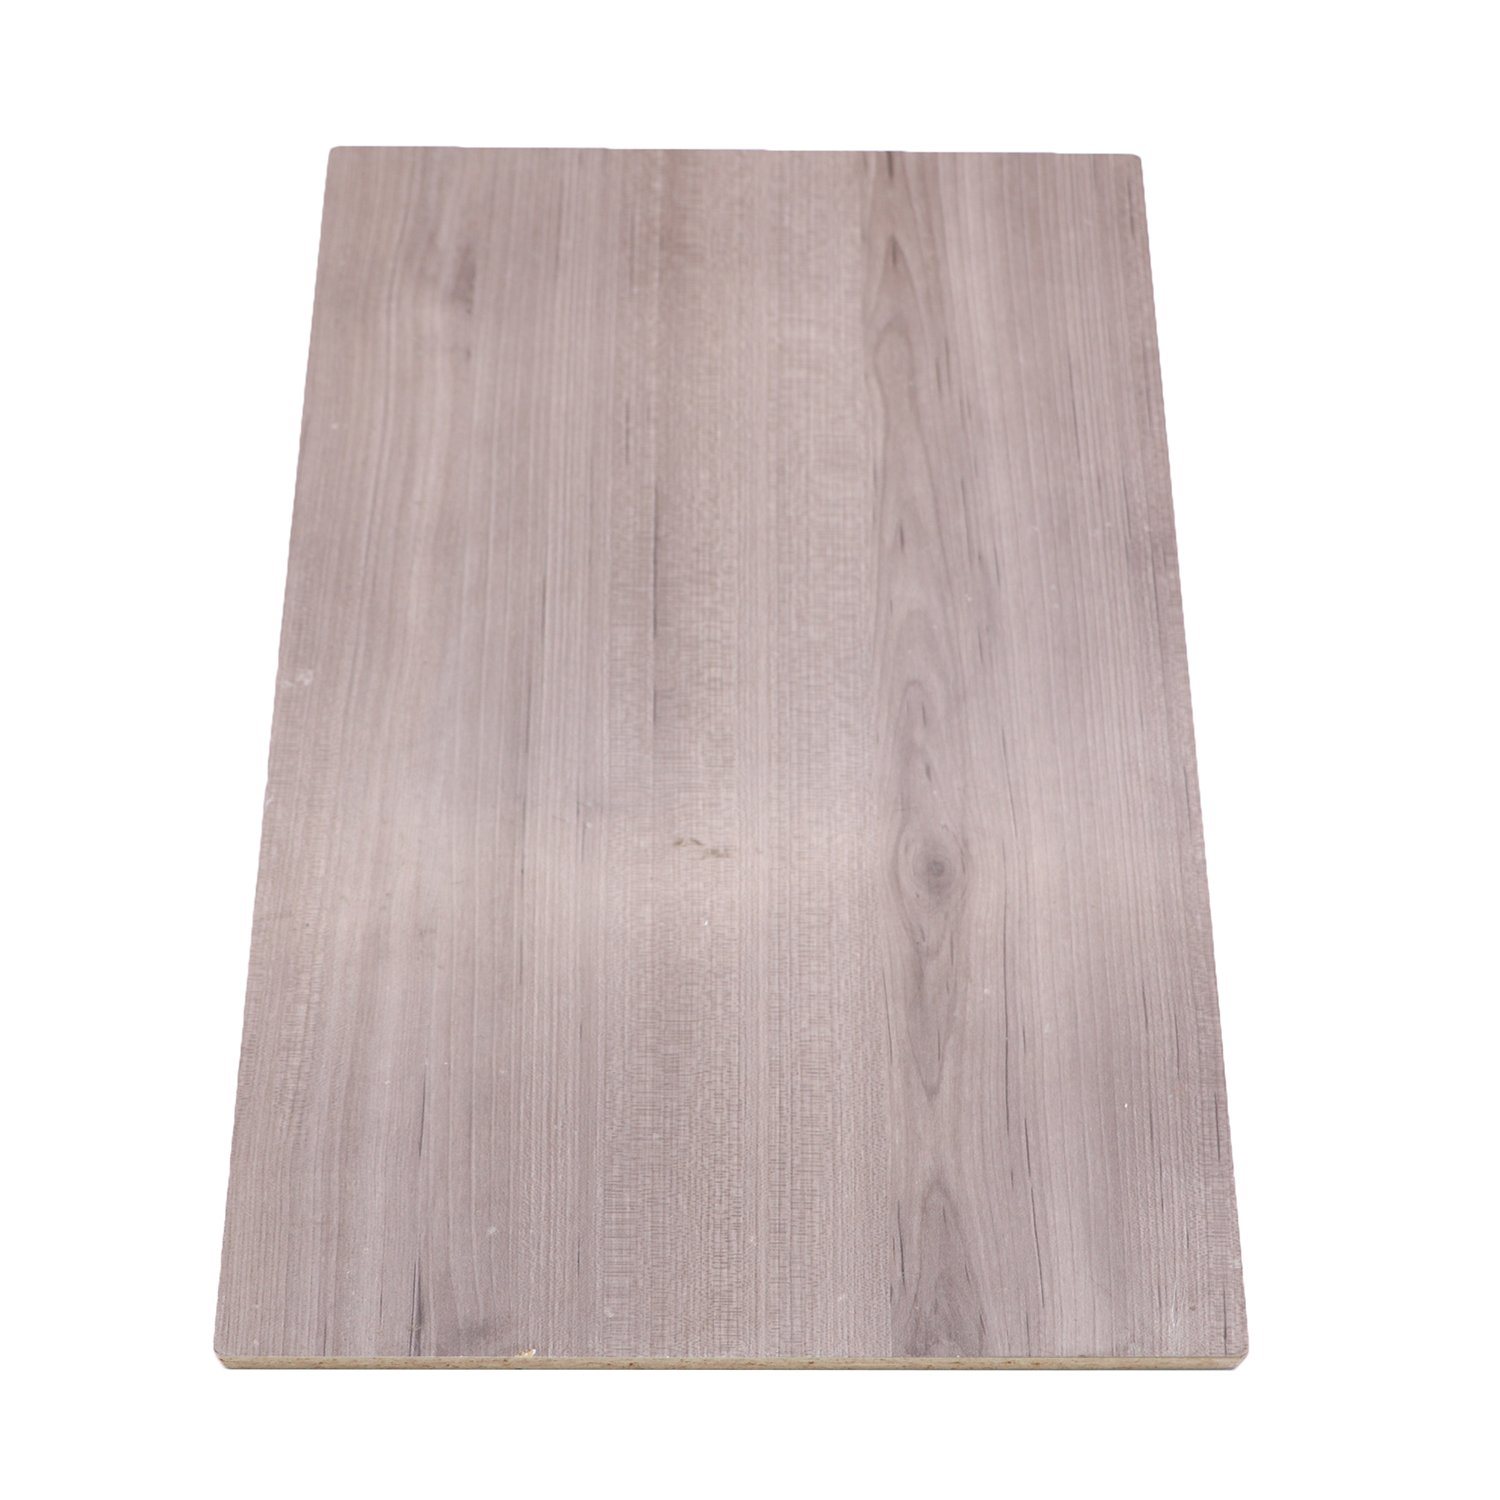 Wood Grain Particleboard Cheap Price with High Quality Melamine Chipboard